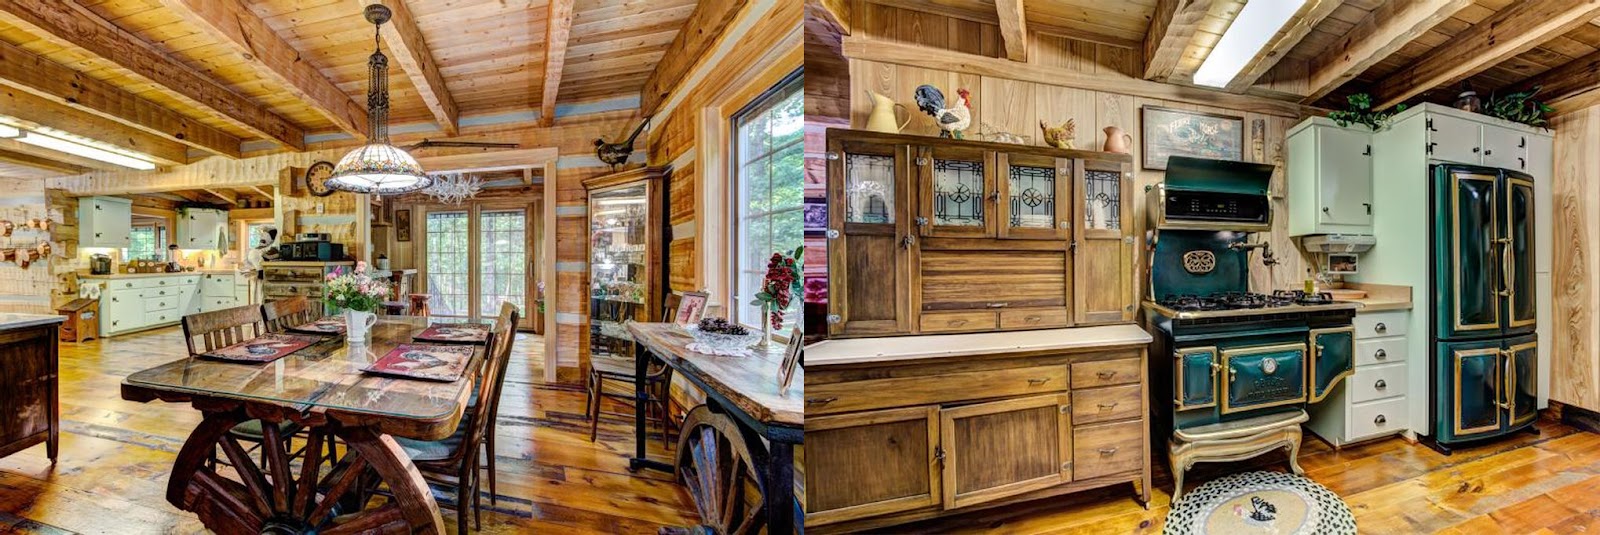 Luxury Log Homes + Timber Frame Homes you won't believe actually exist Timberlake Hearthstone Homes